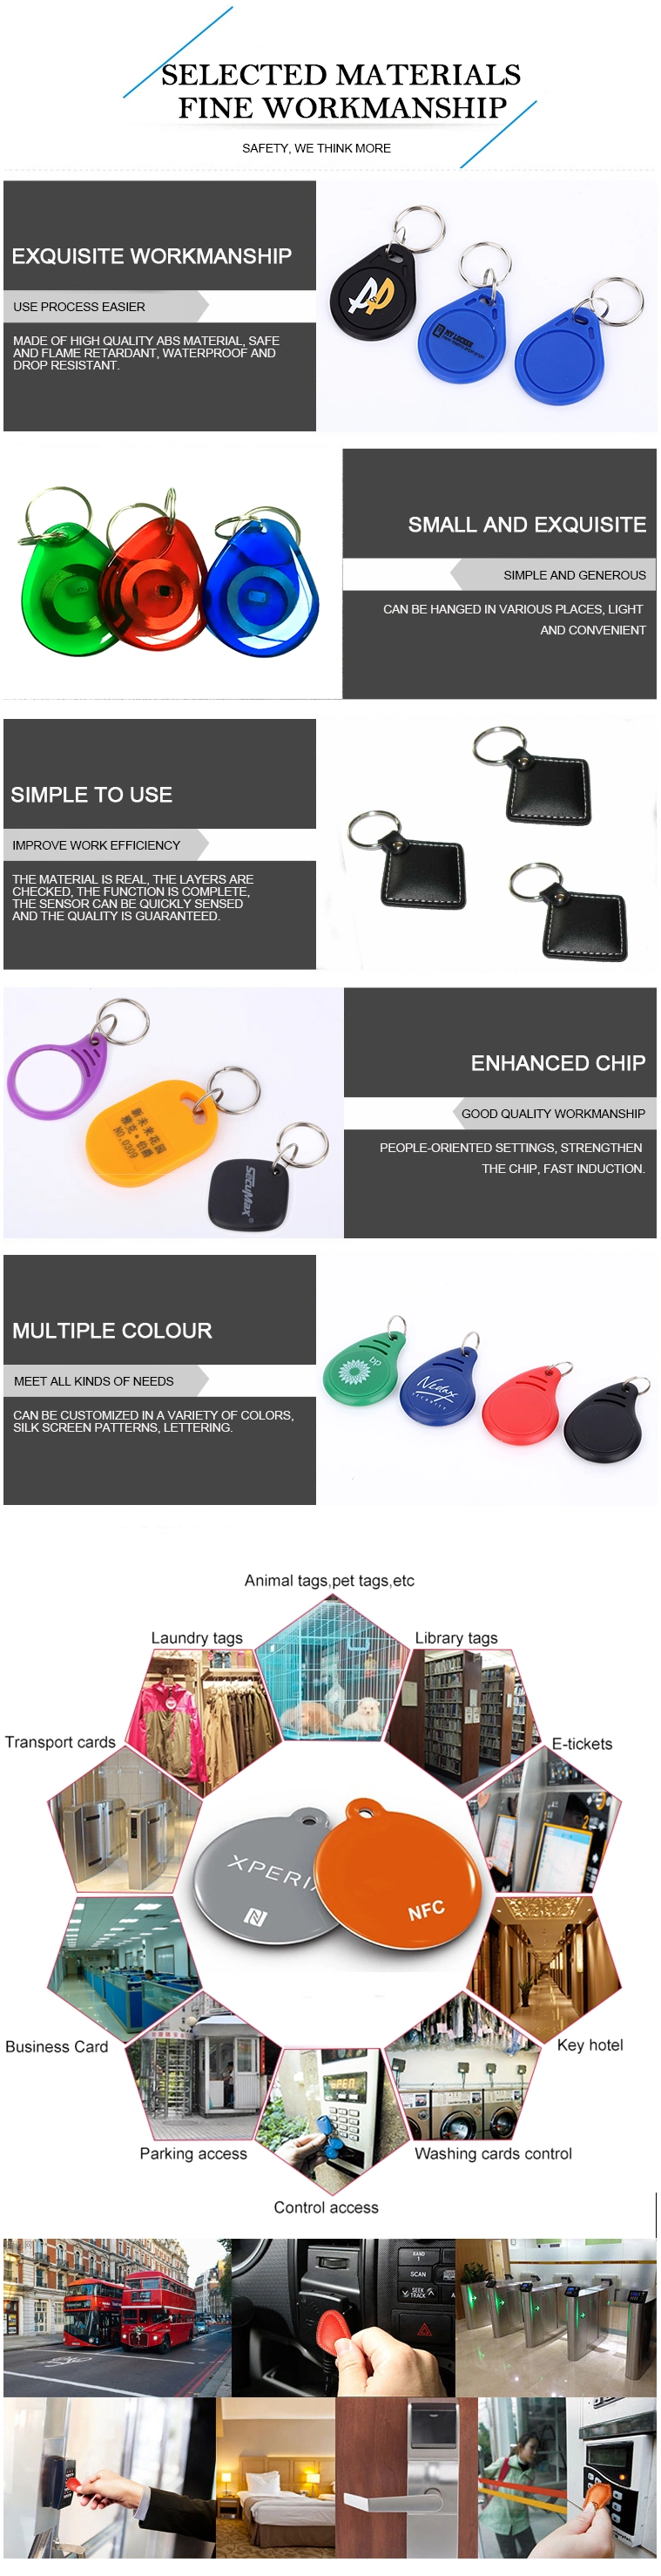 125kHz T5577 ABS Contactless RFID Keyfob Tag